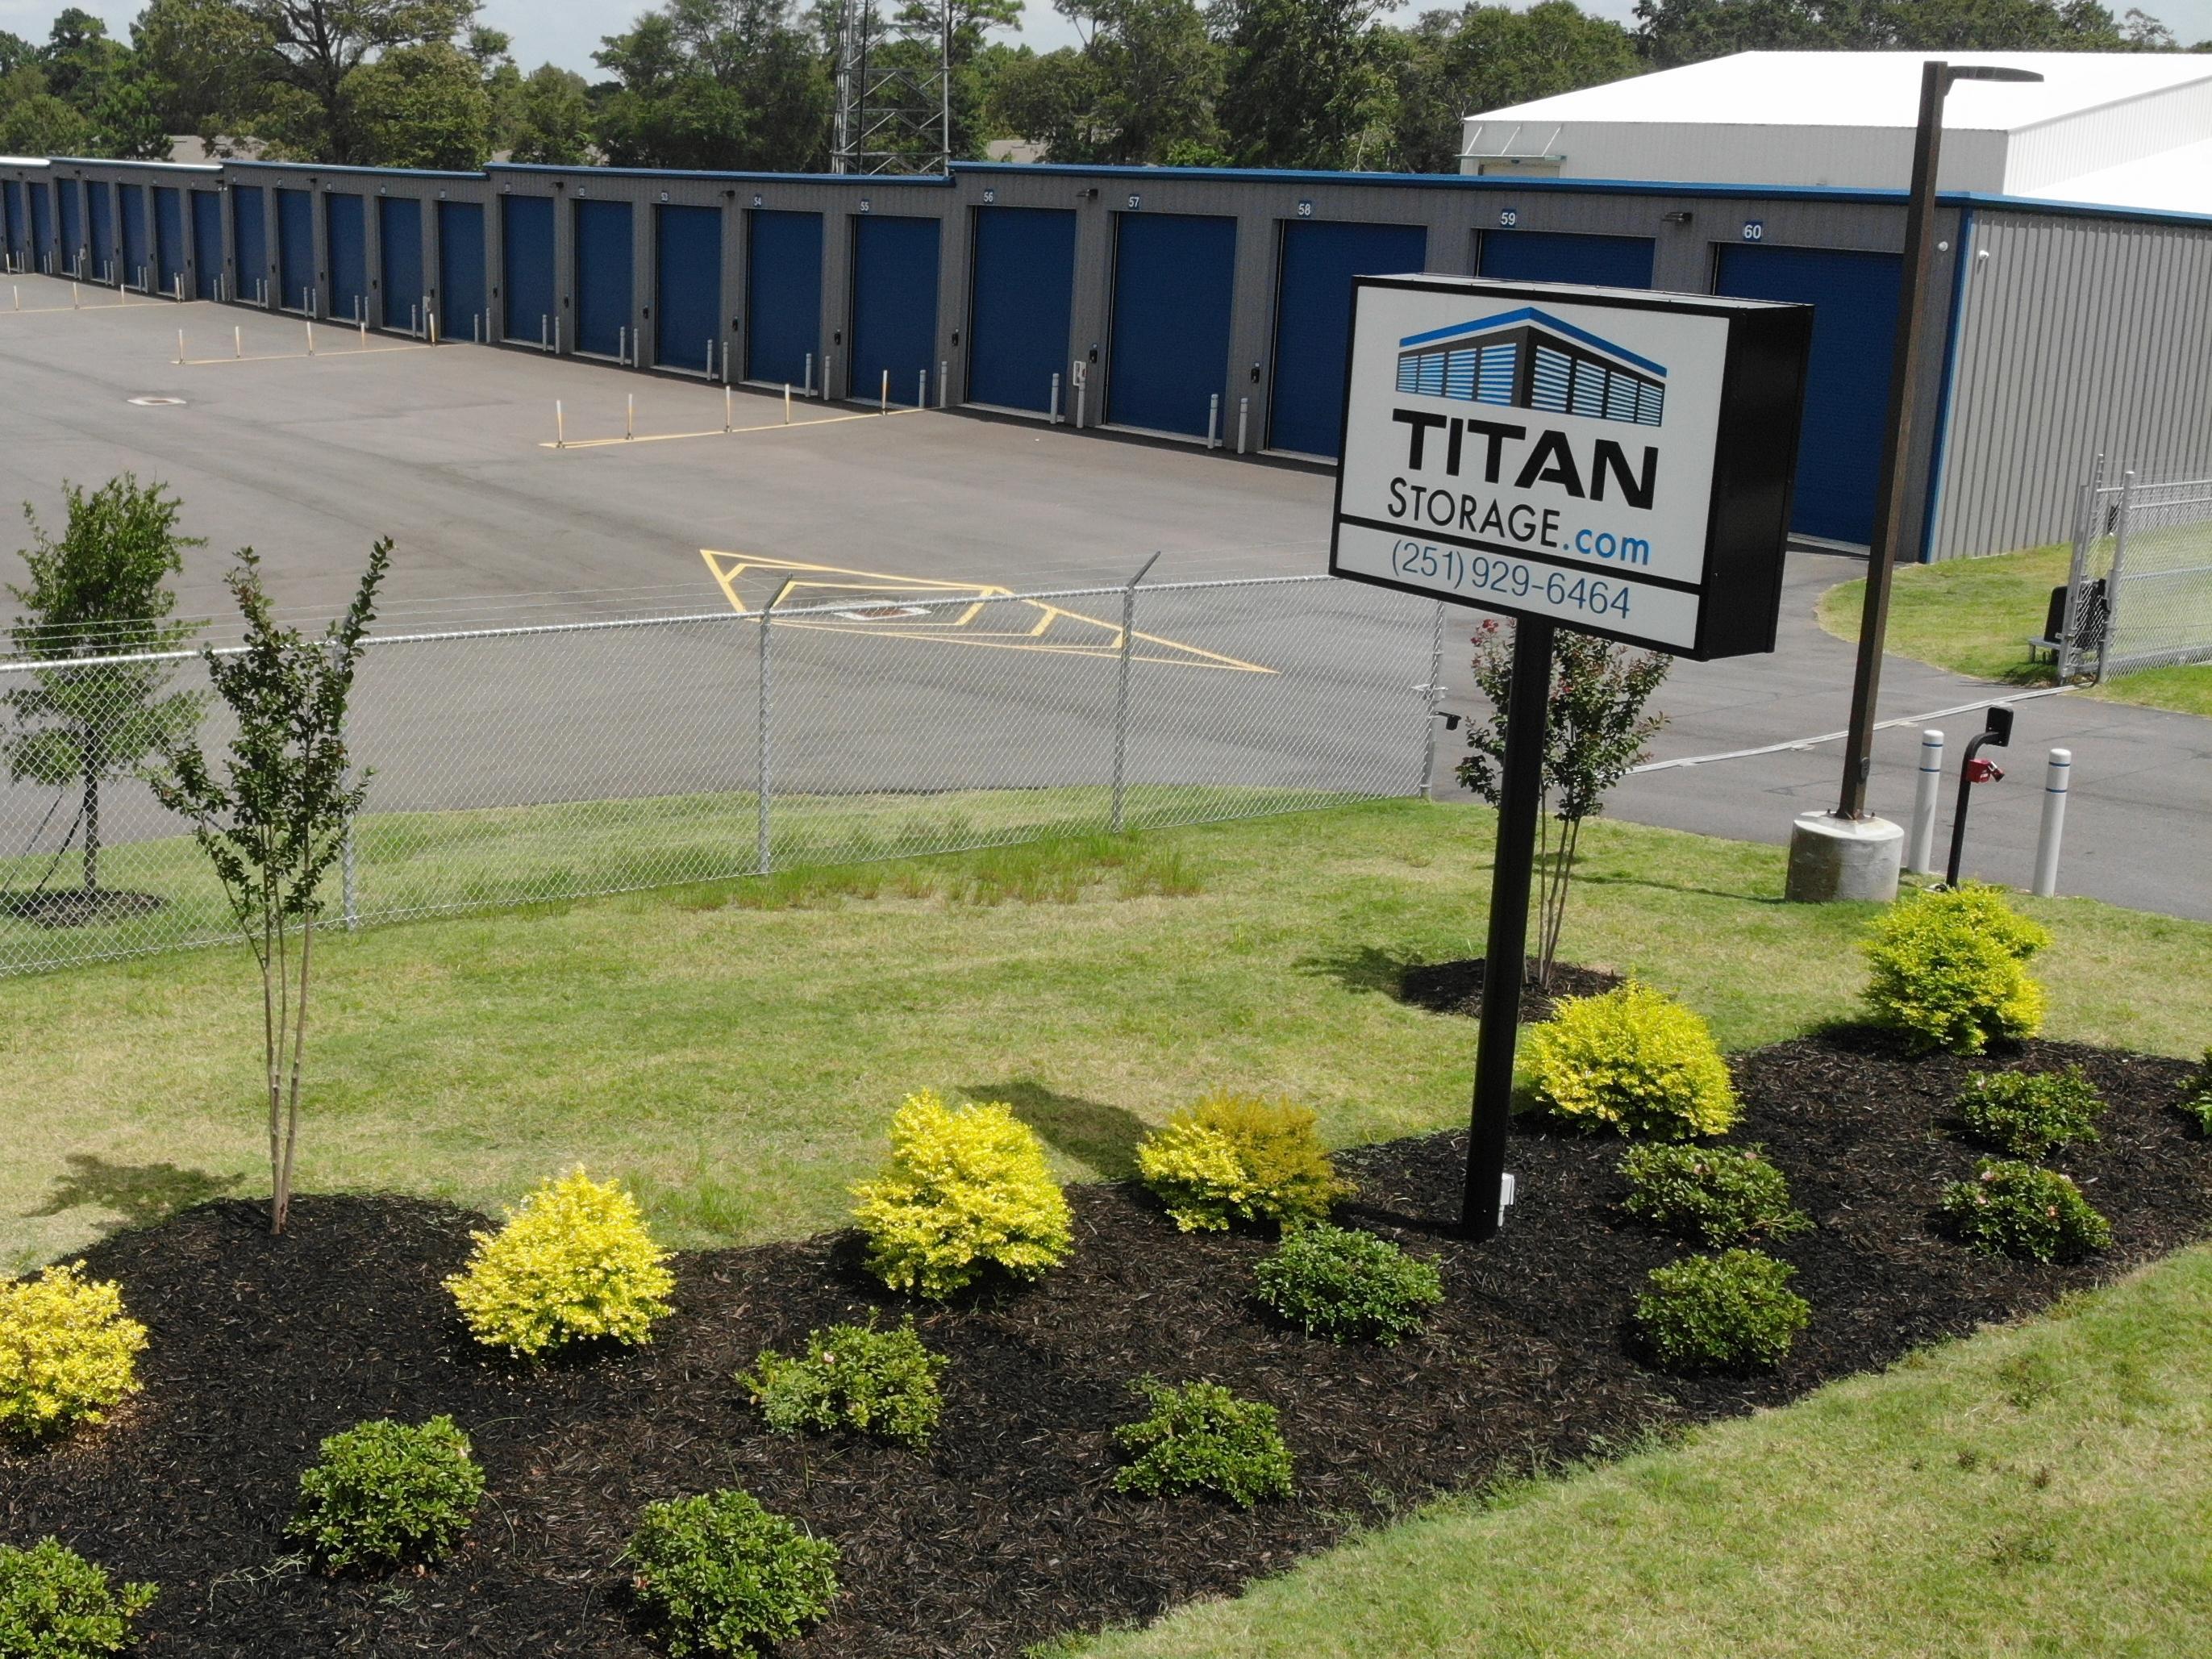 GET IN TOUCH WITH TITAN STORAGE FOR YOUR Spanish Fort, AL CLASSIC CAR STORAGE UNIT SOLUTION